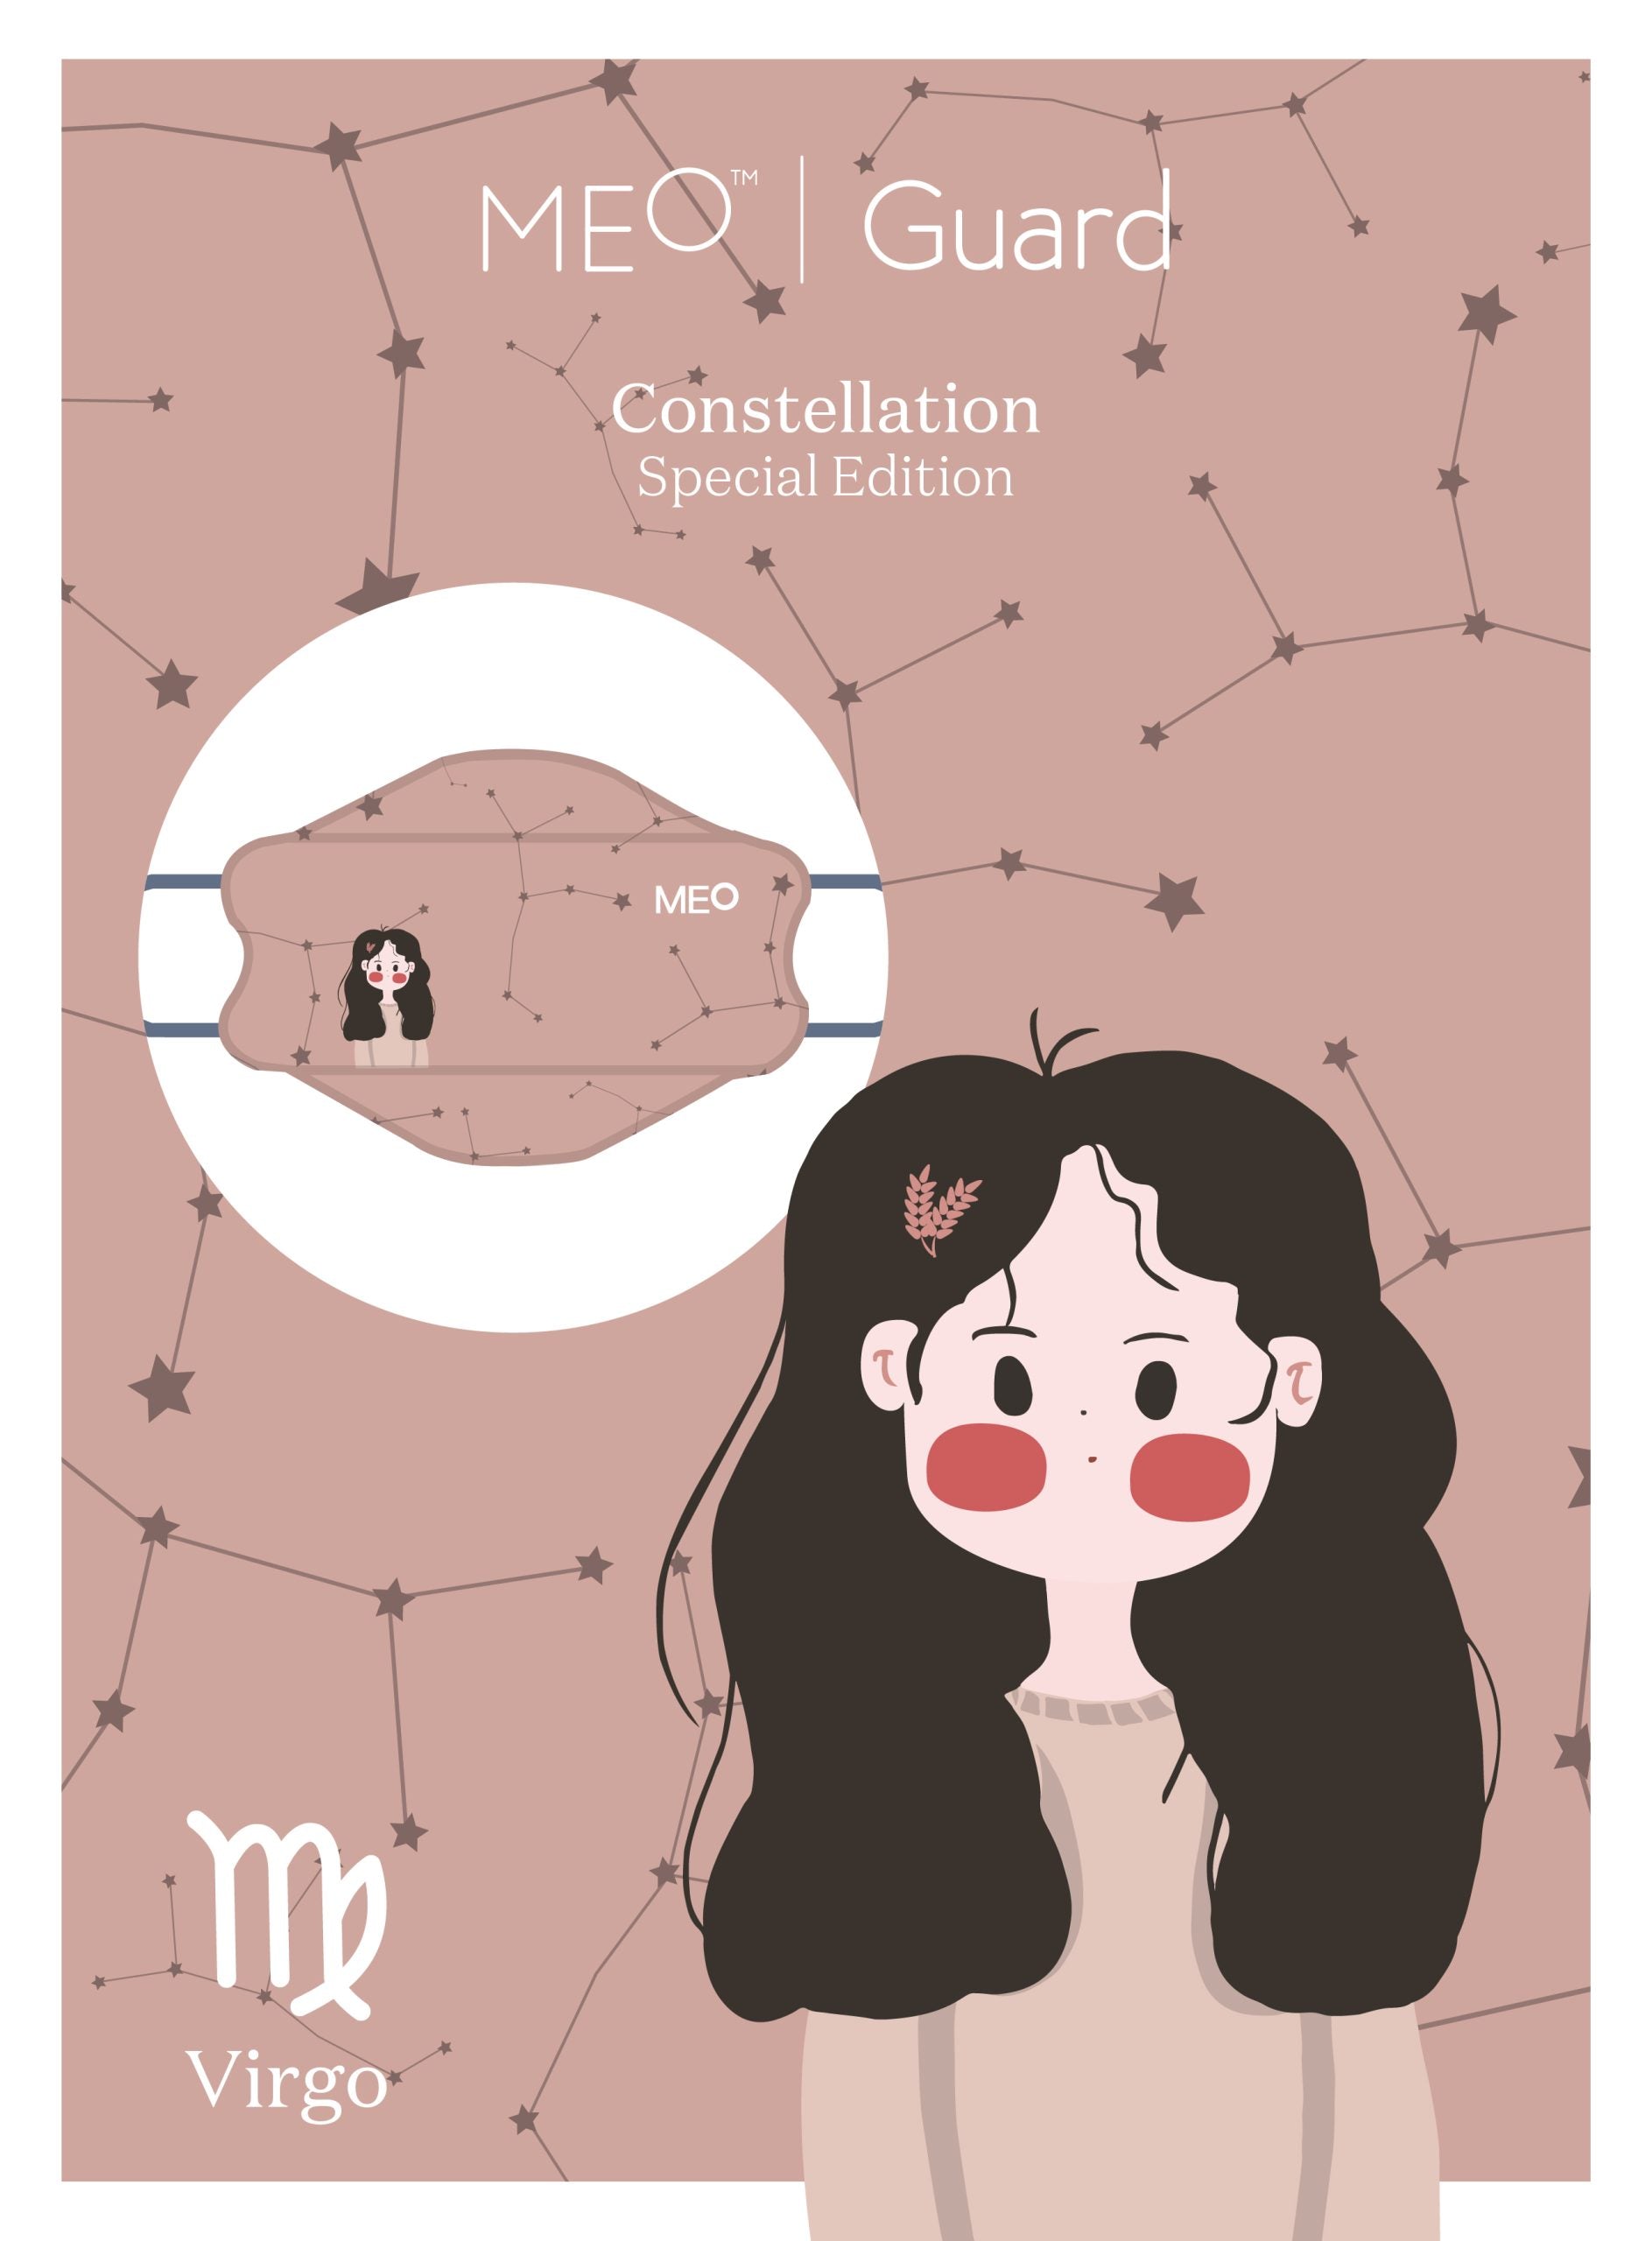 Meo Guard: Constellation Special Edition